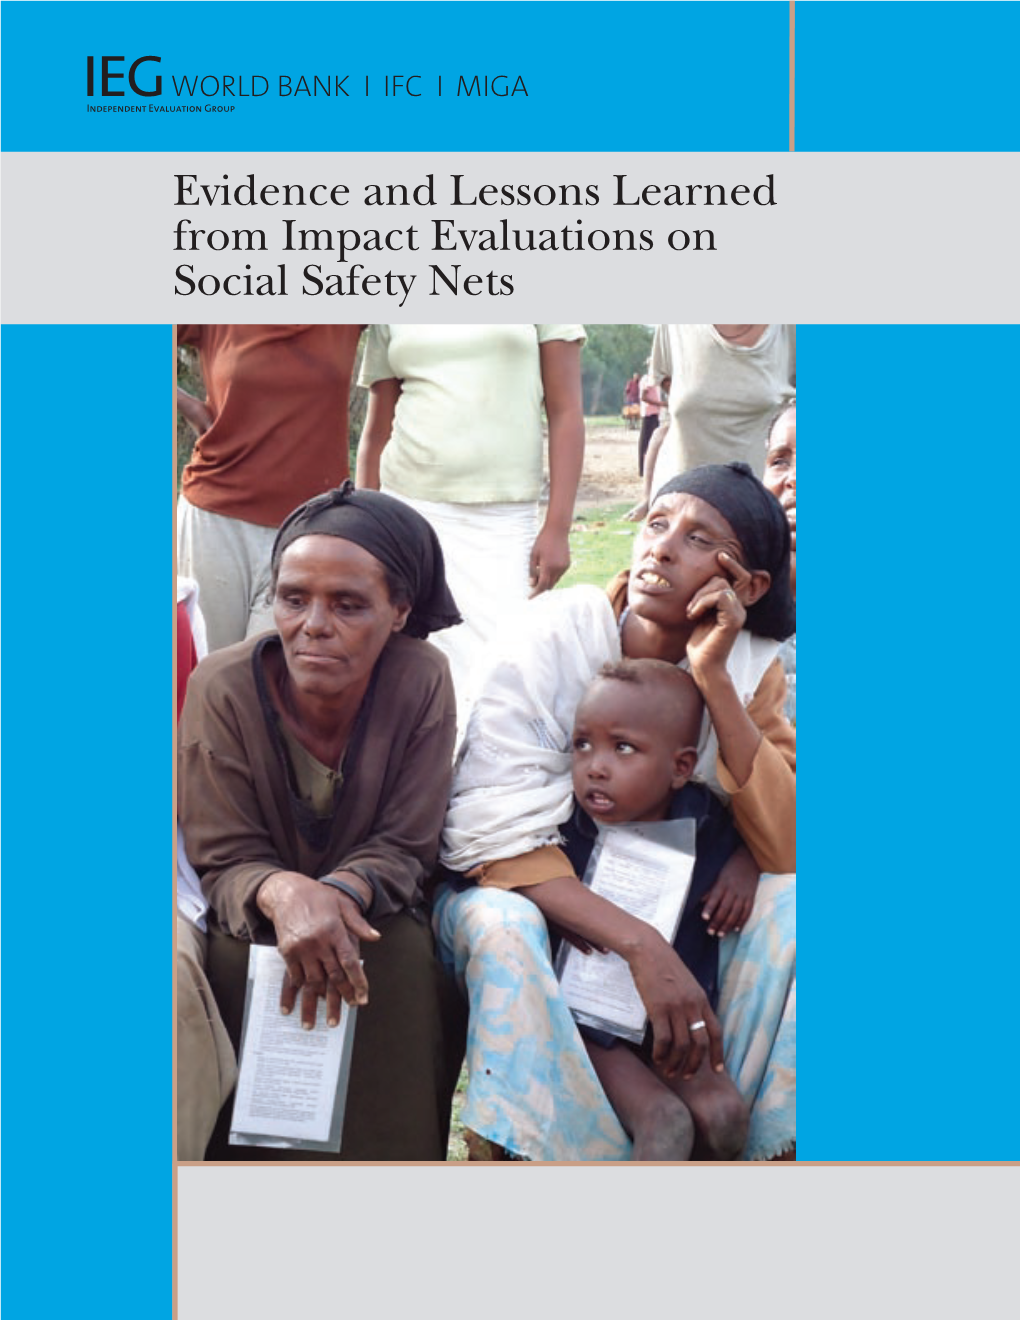 Evidence and Lessons Learned from Impact Evaluations on Social Safety Nets